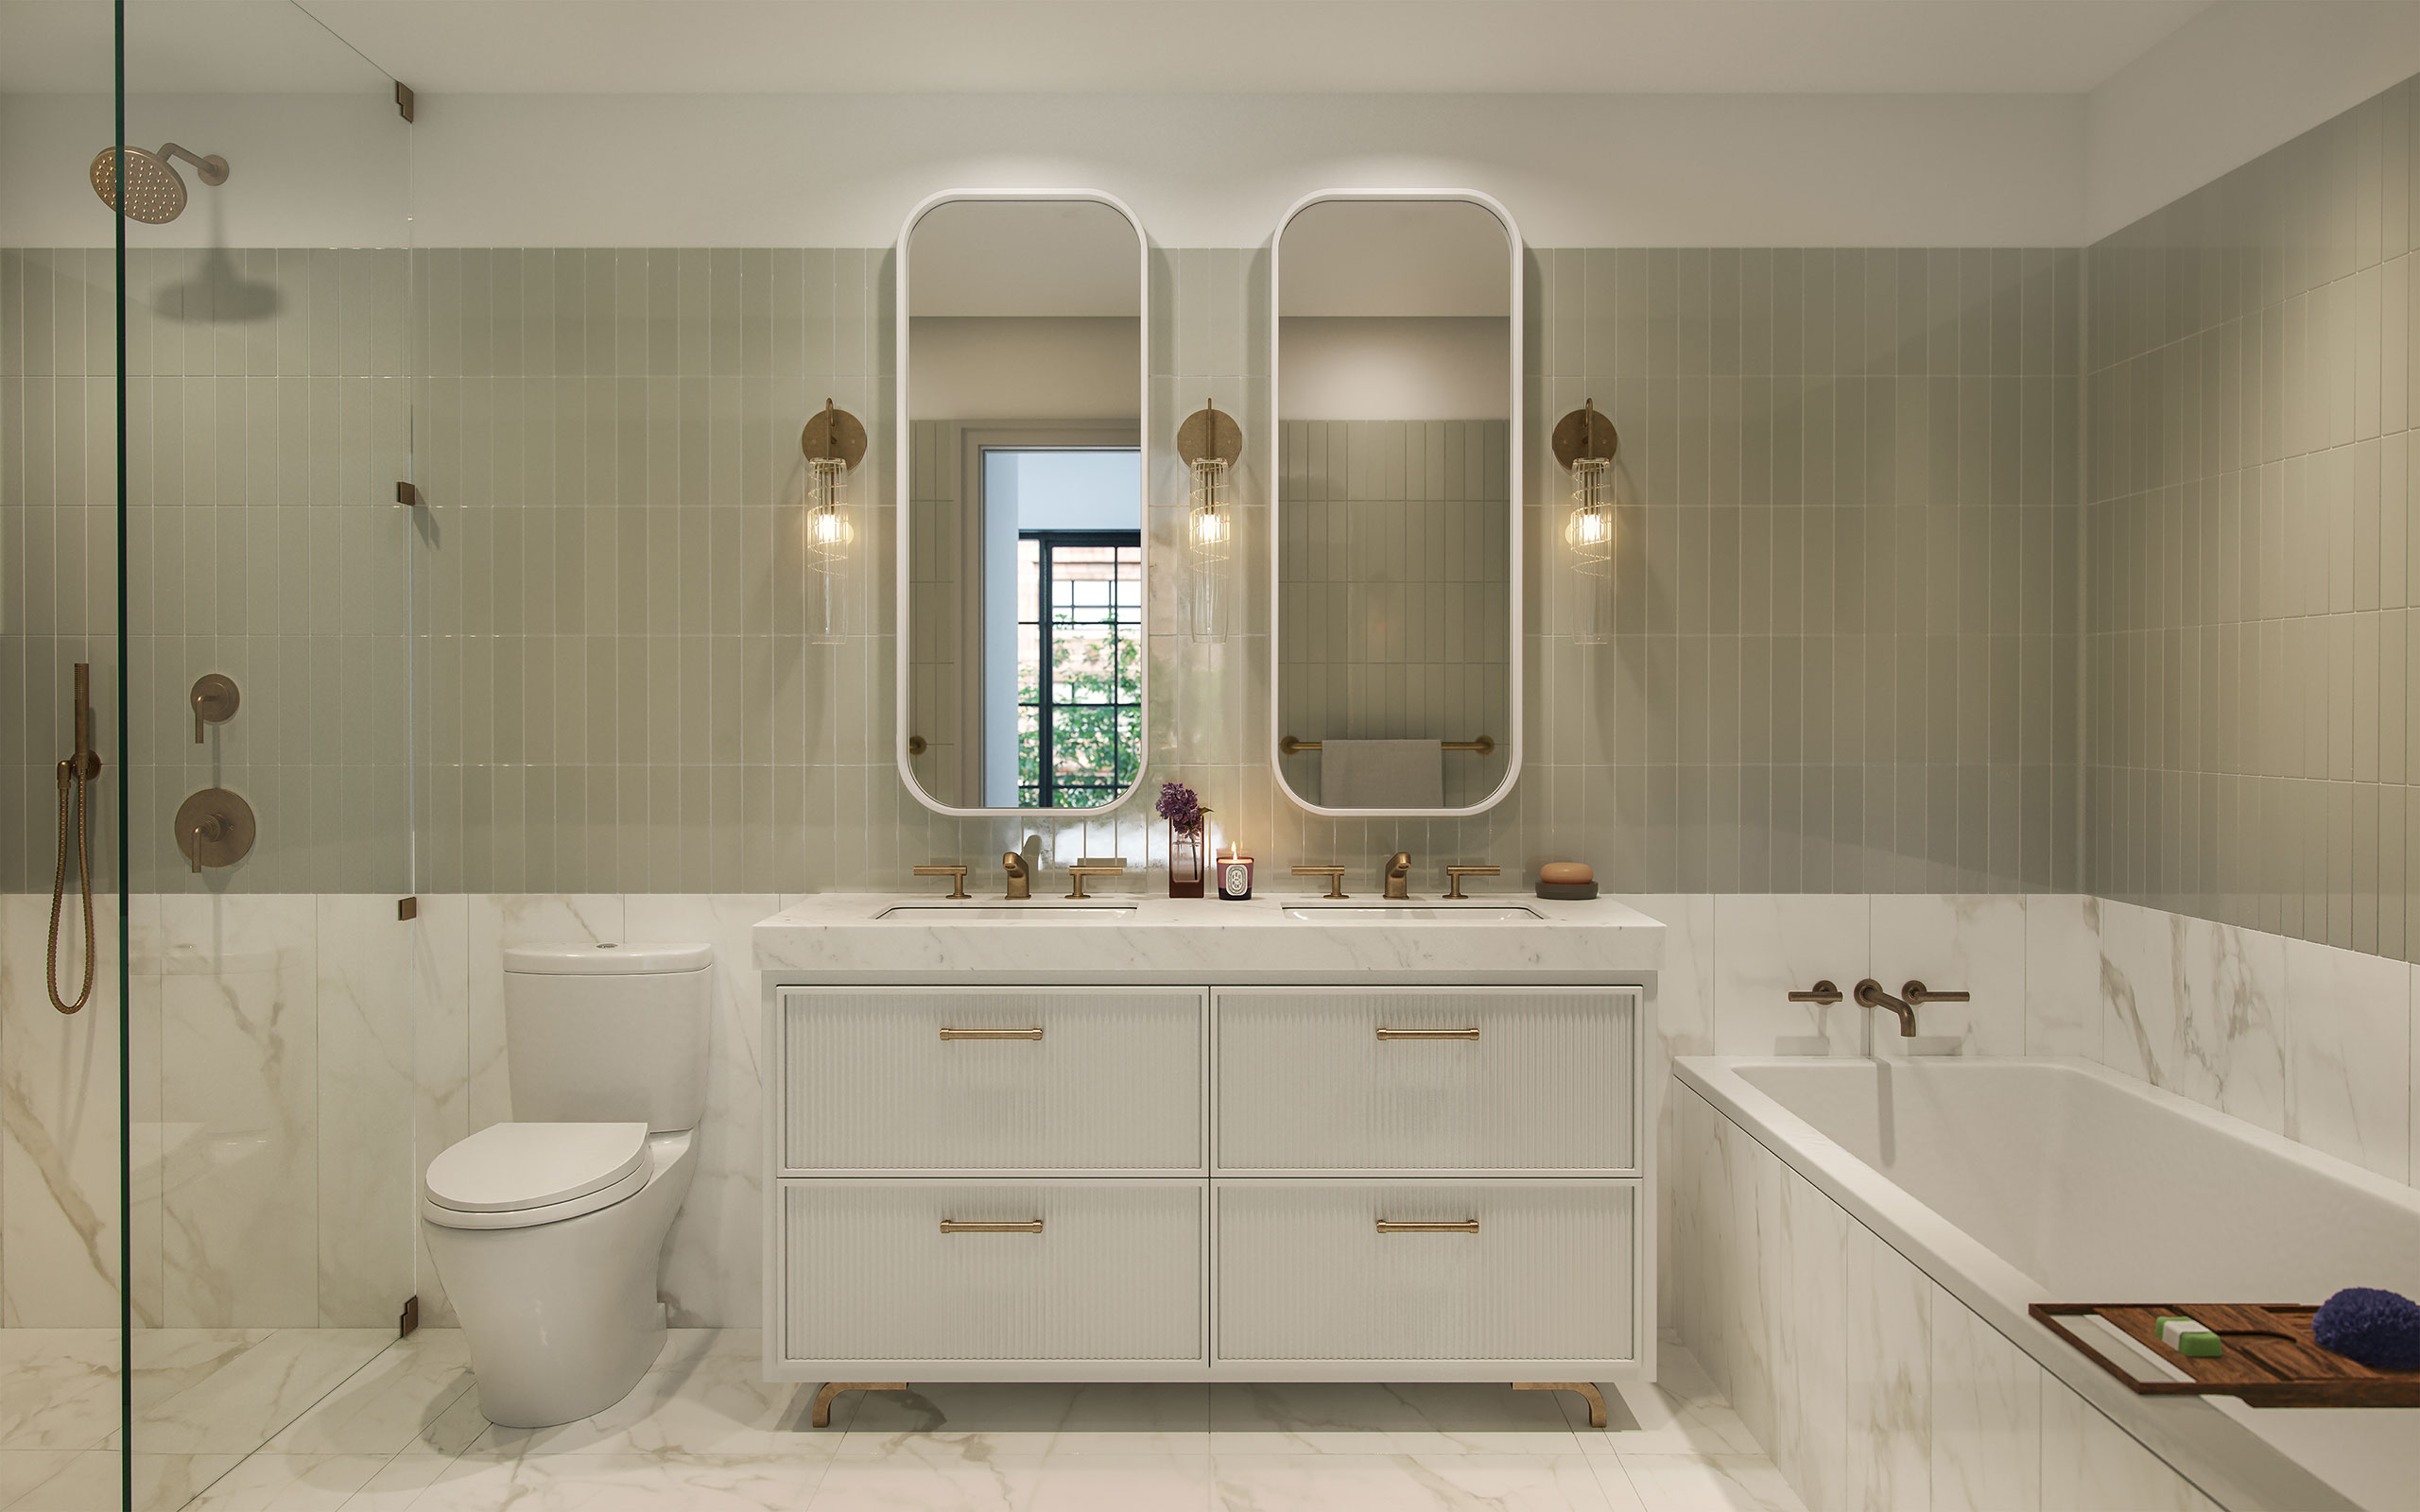 Post House primary bathroom featuring a deep soaking tub, Waterworks fixtures, custom vanities, and arched recessed medicine cabinets.